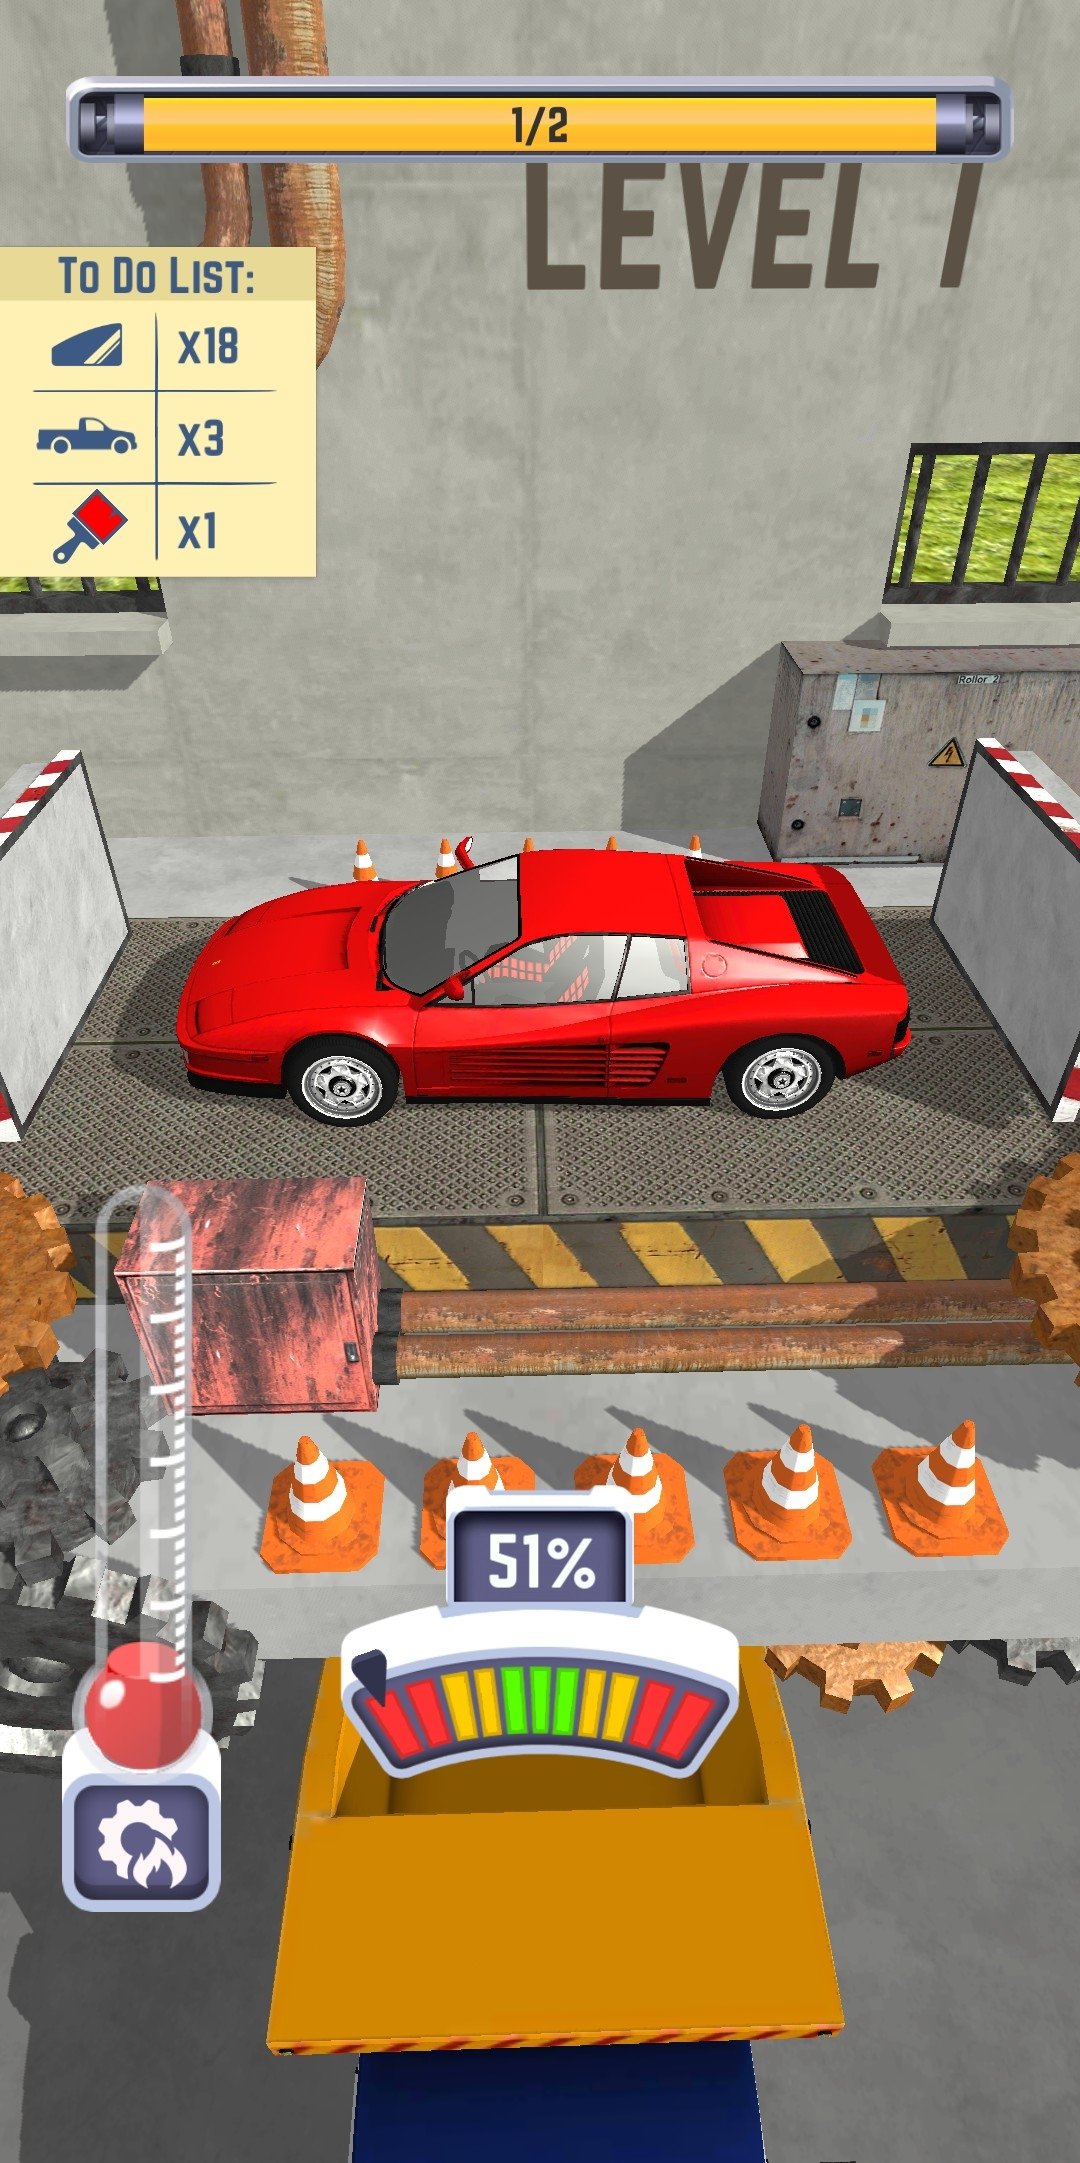 Car Crusher 1 2 2 Download For Android Apk Free - the crusher thumbnail 1 roblox